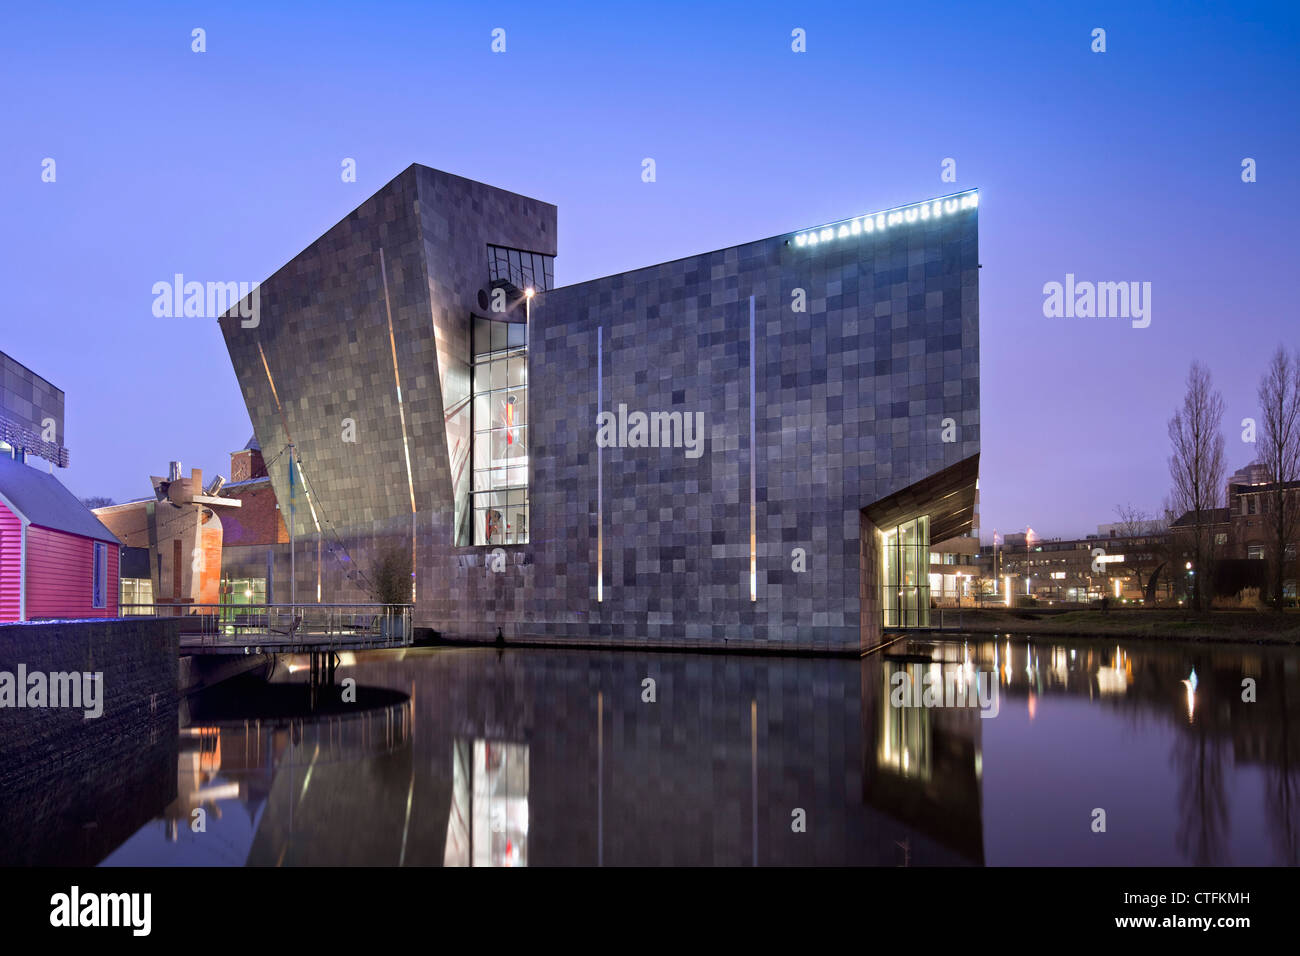 The Netherlands, Eindhoven, Van Abbe Museum. Stock Photo